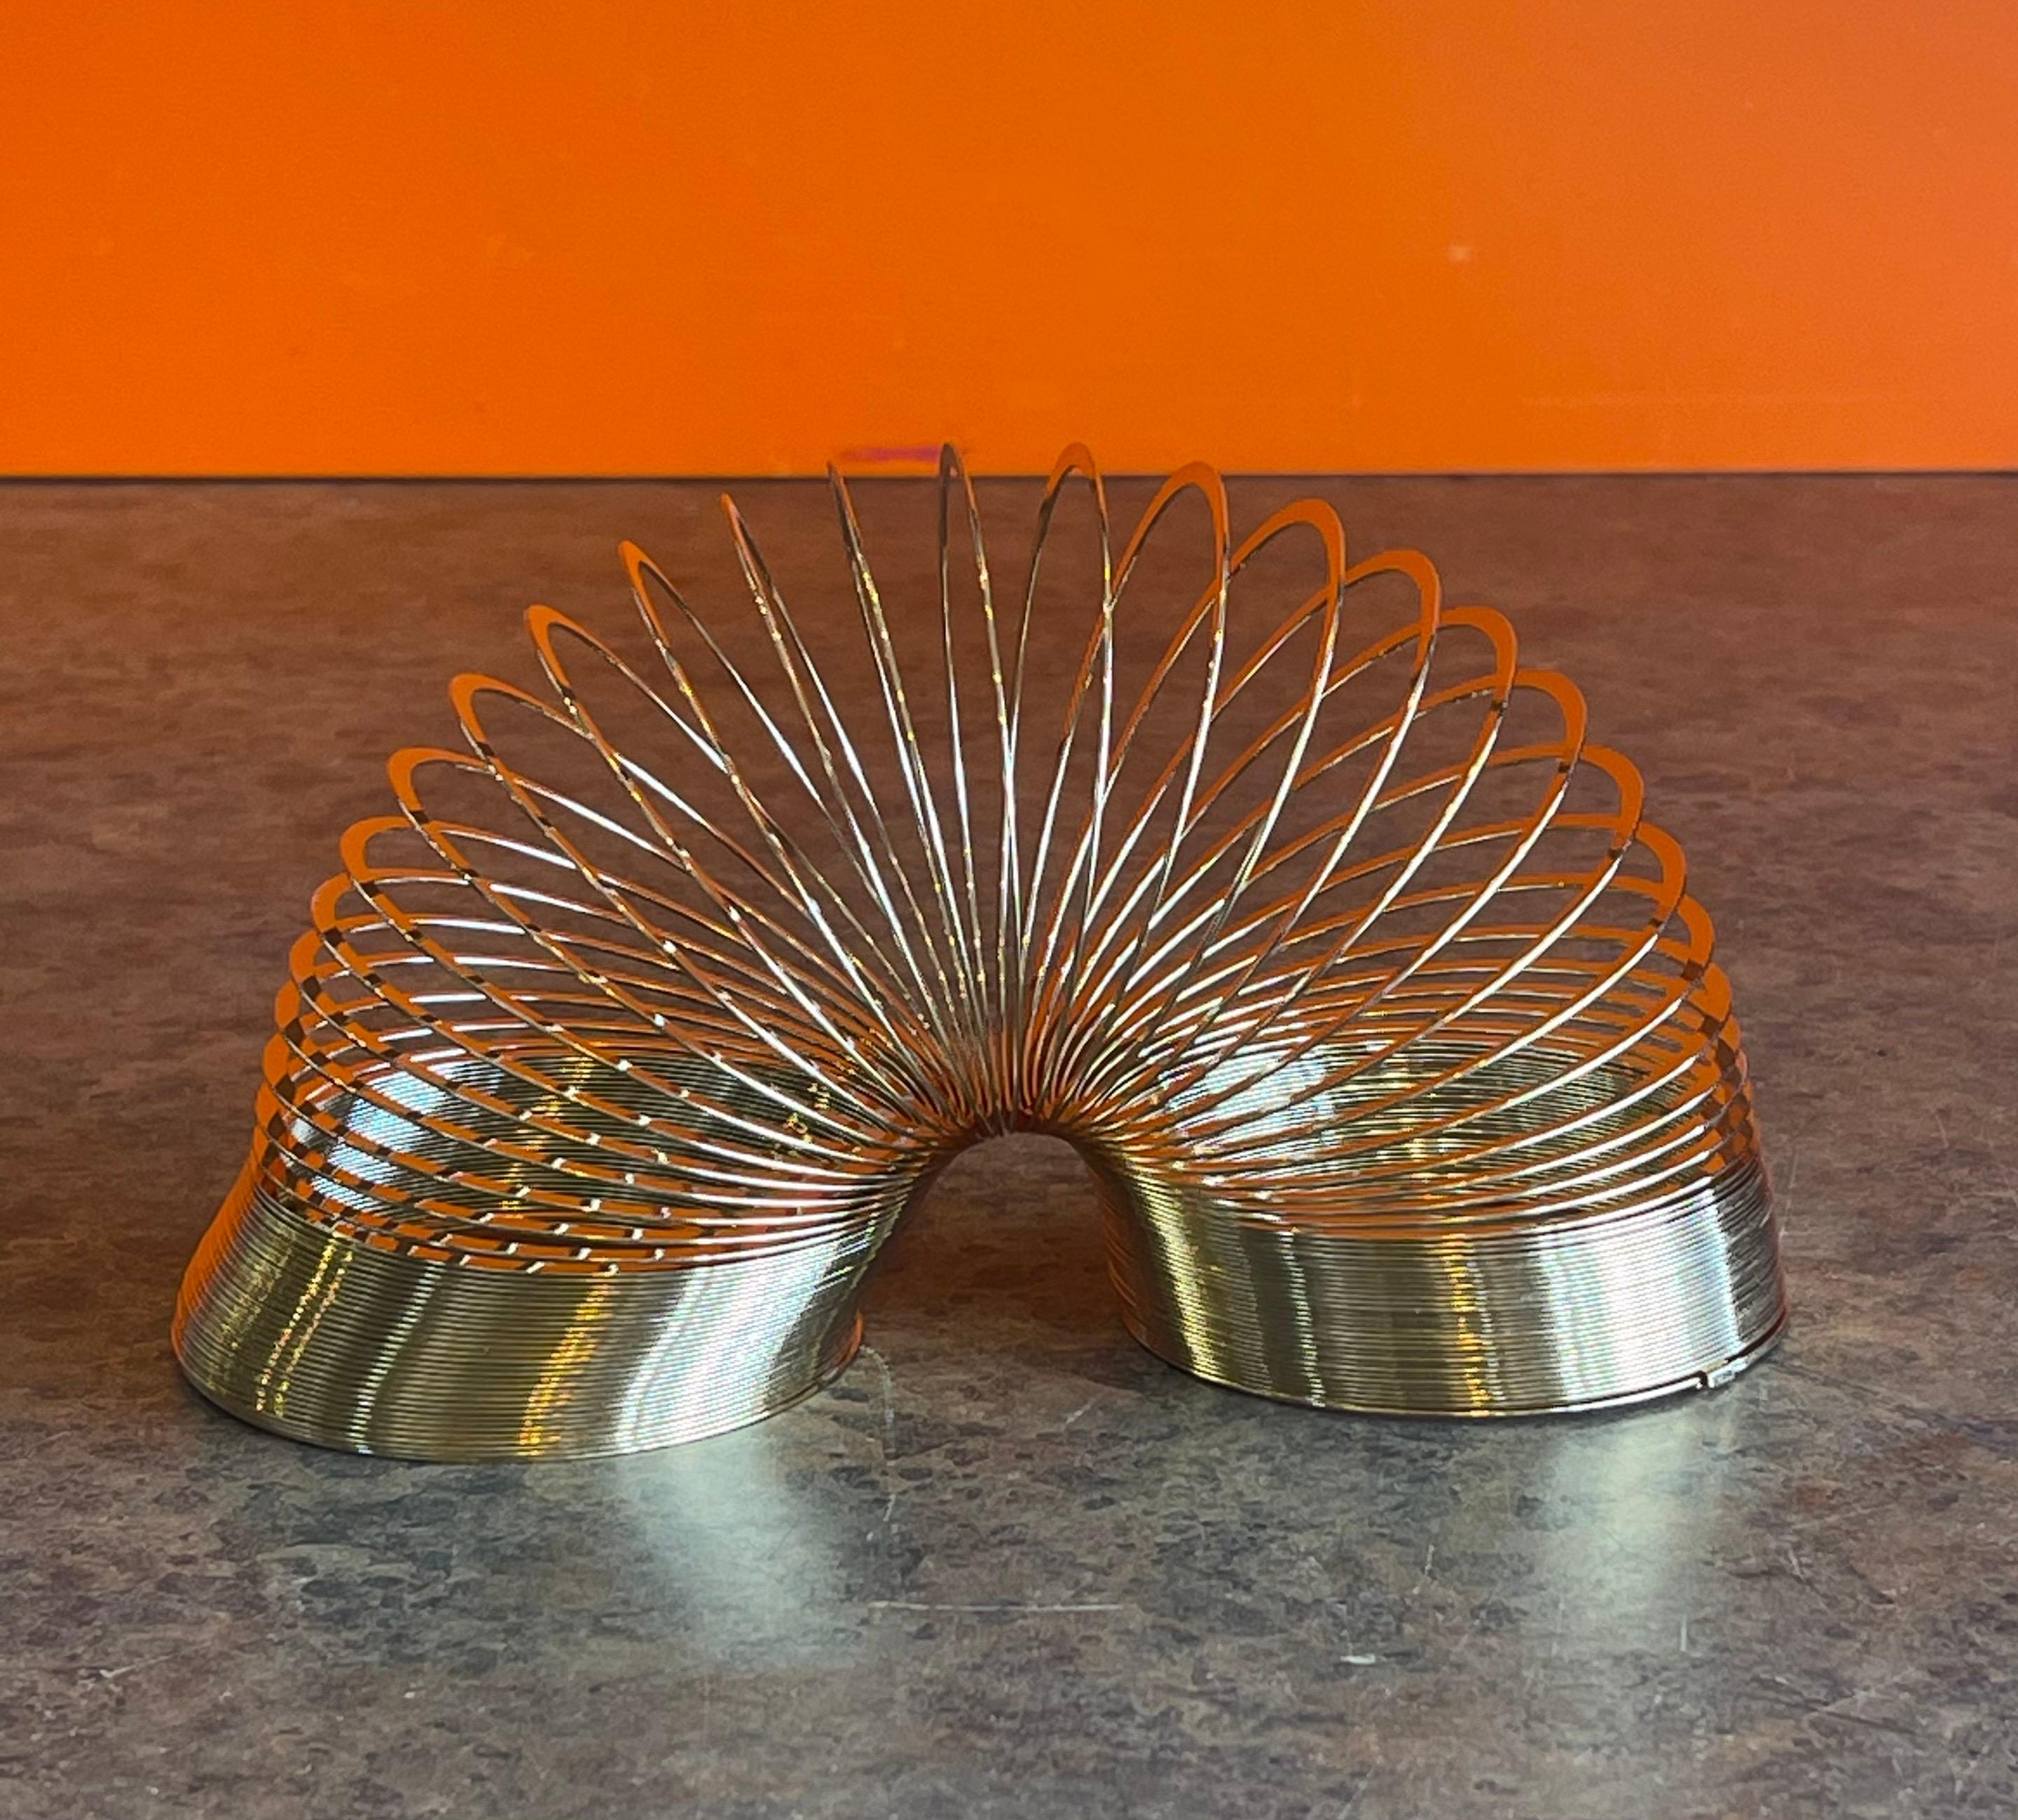 Like new 50th Anniversary gold-plated brass Slinky toy in wood box, circa 1995. This item is in original plastic packaging an has never been played with. The Slinky was released in 1995 to celebrate the toy's 50th anniversary; this is a very hard to